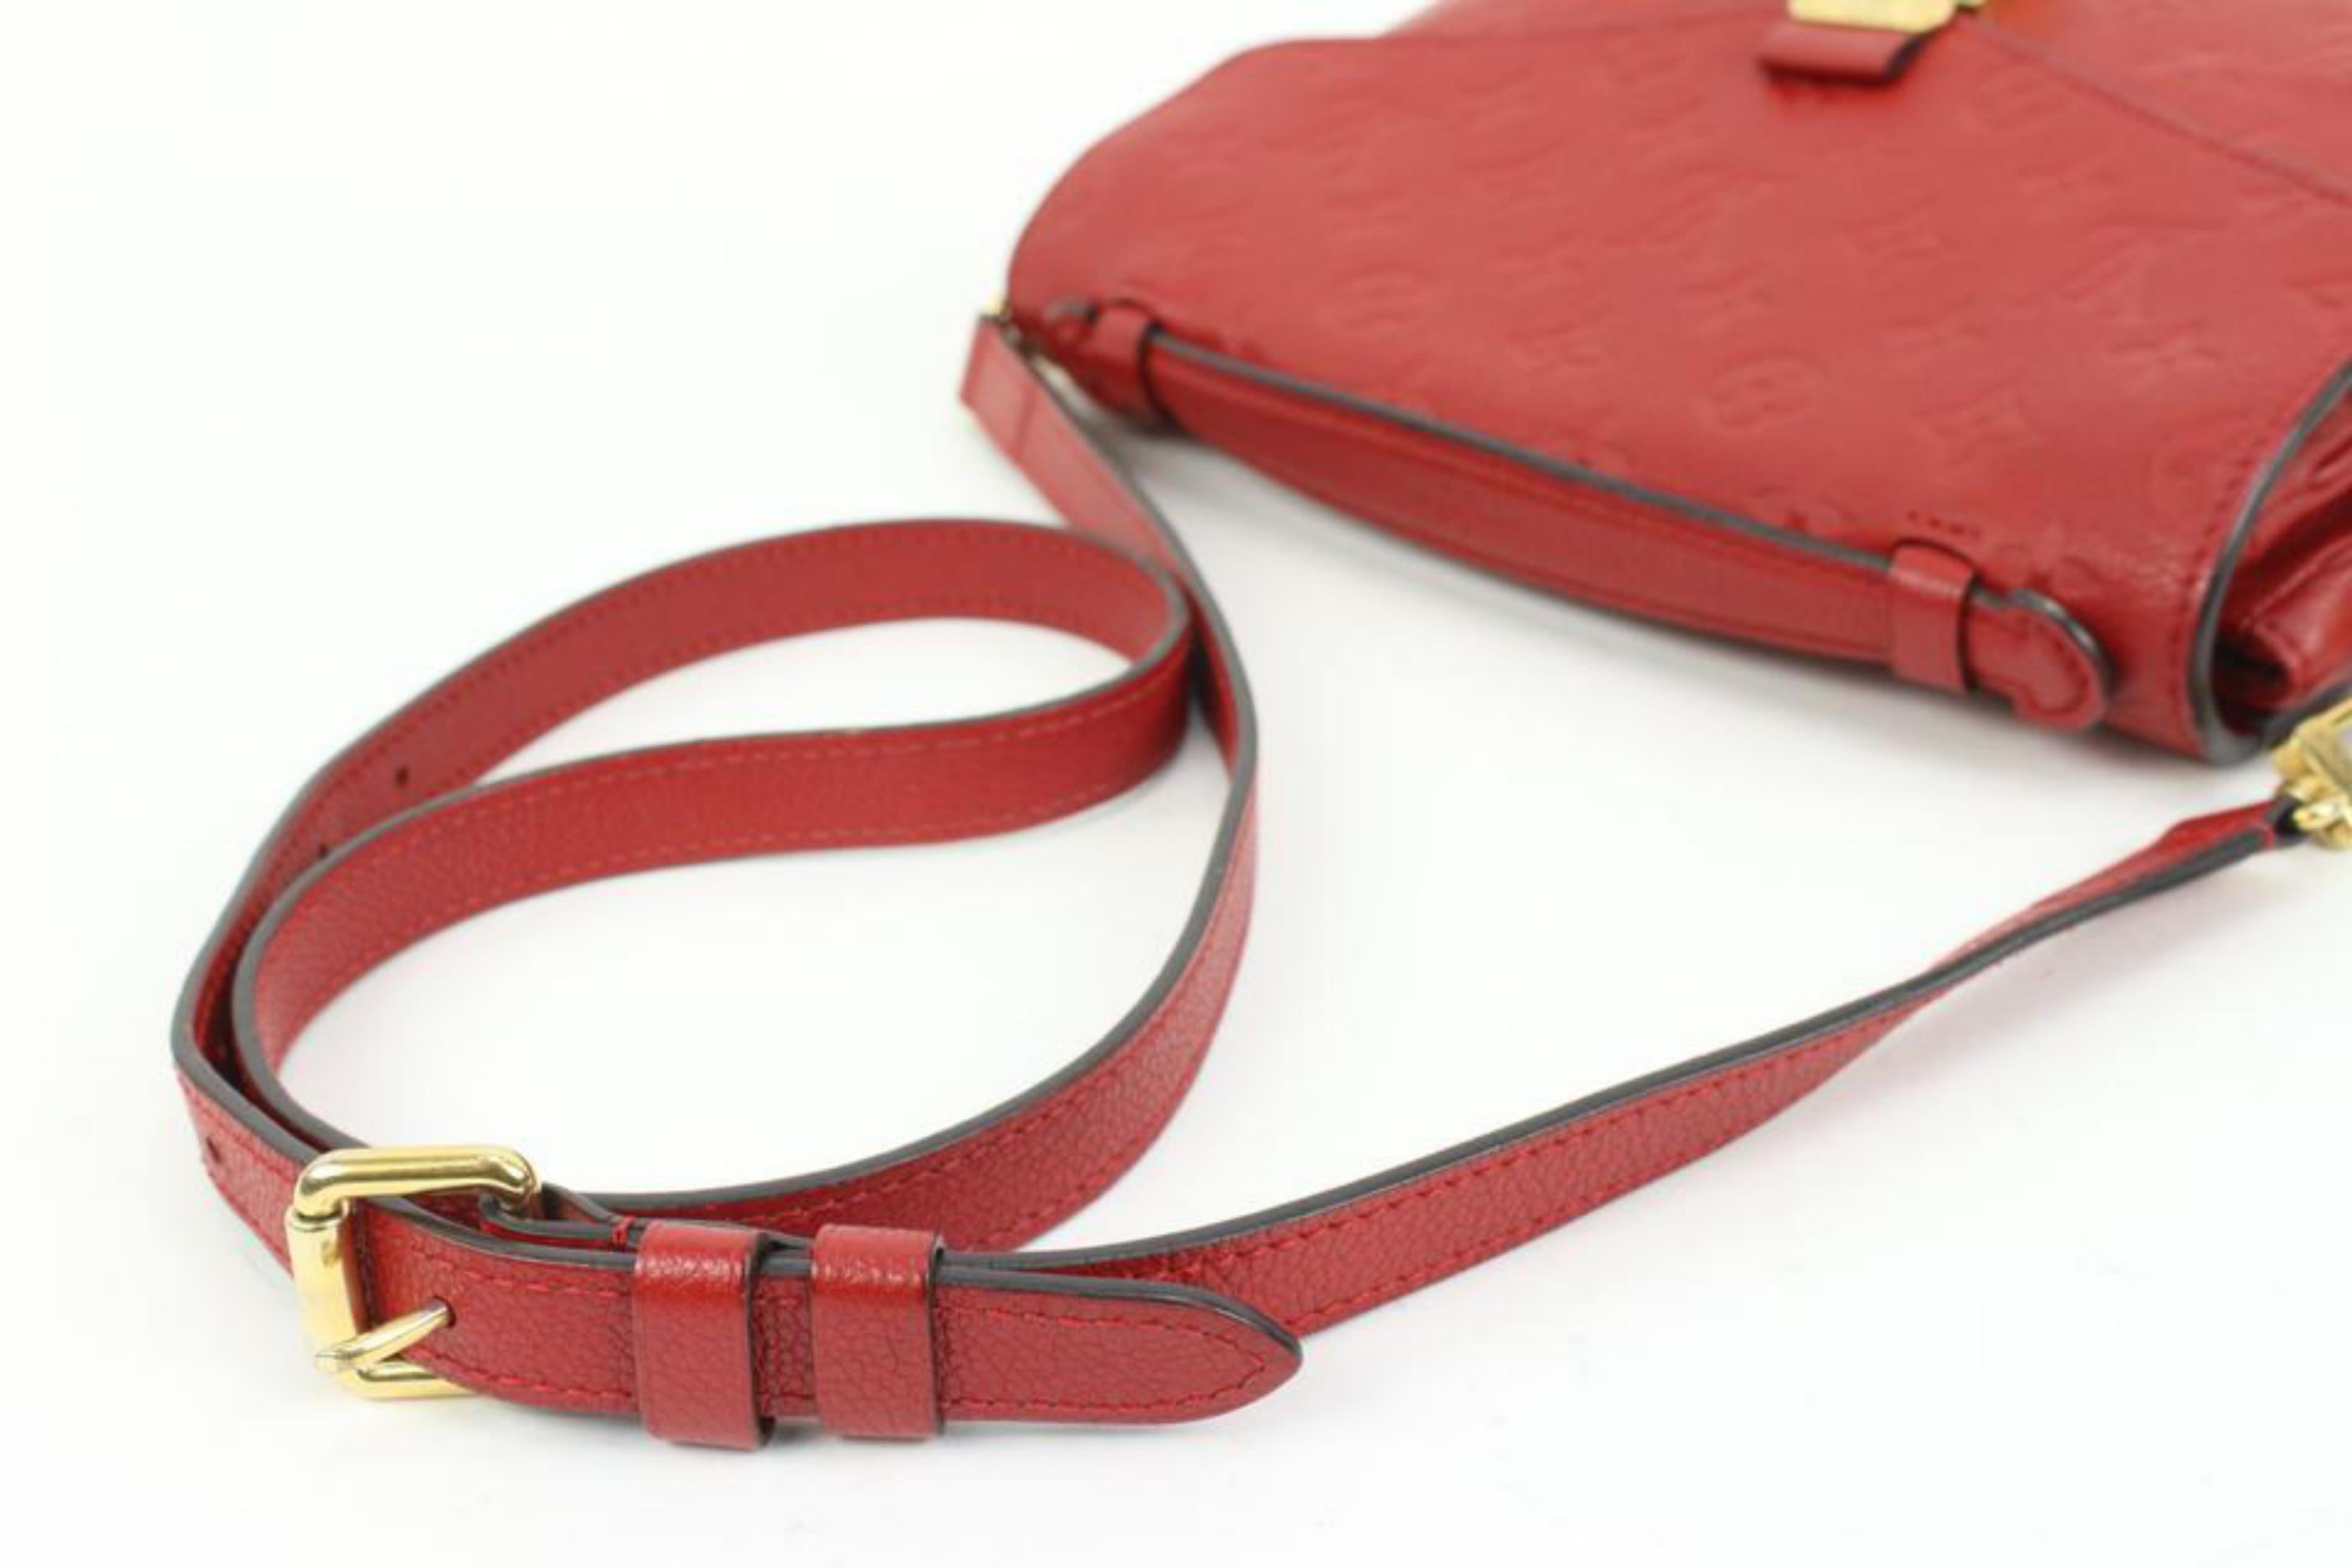 Louis Vuitton Red Monogram Leather Empreinte Pochette Metis Crossbody Bag 41lk78 In Good Condition For Sale In Dix hills, NY